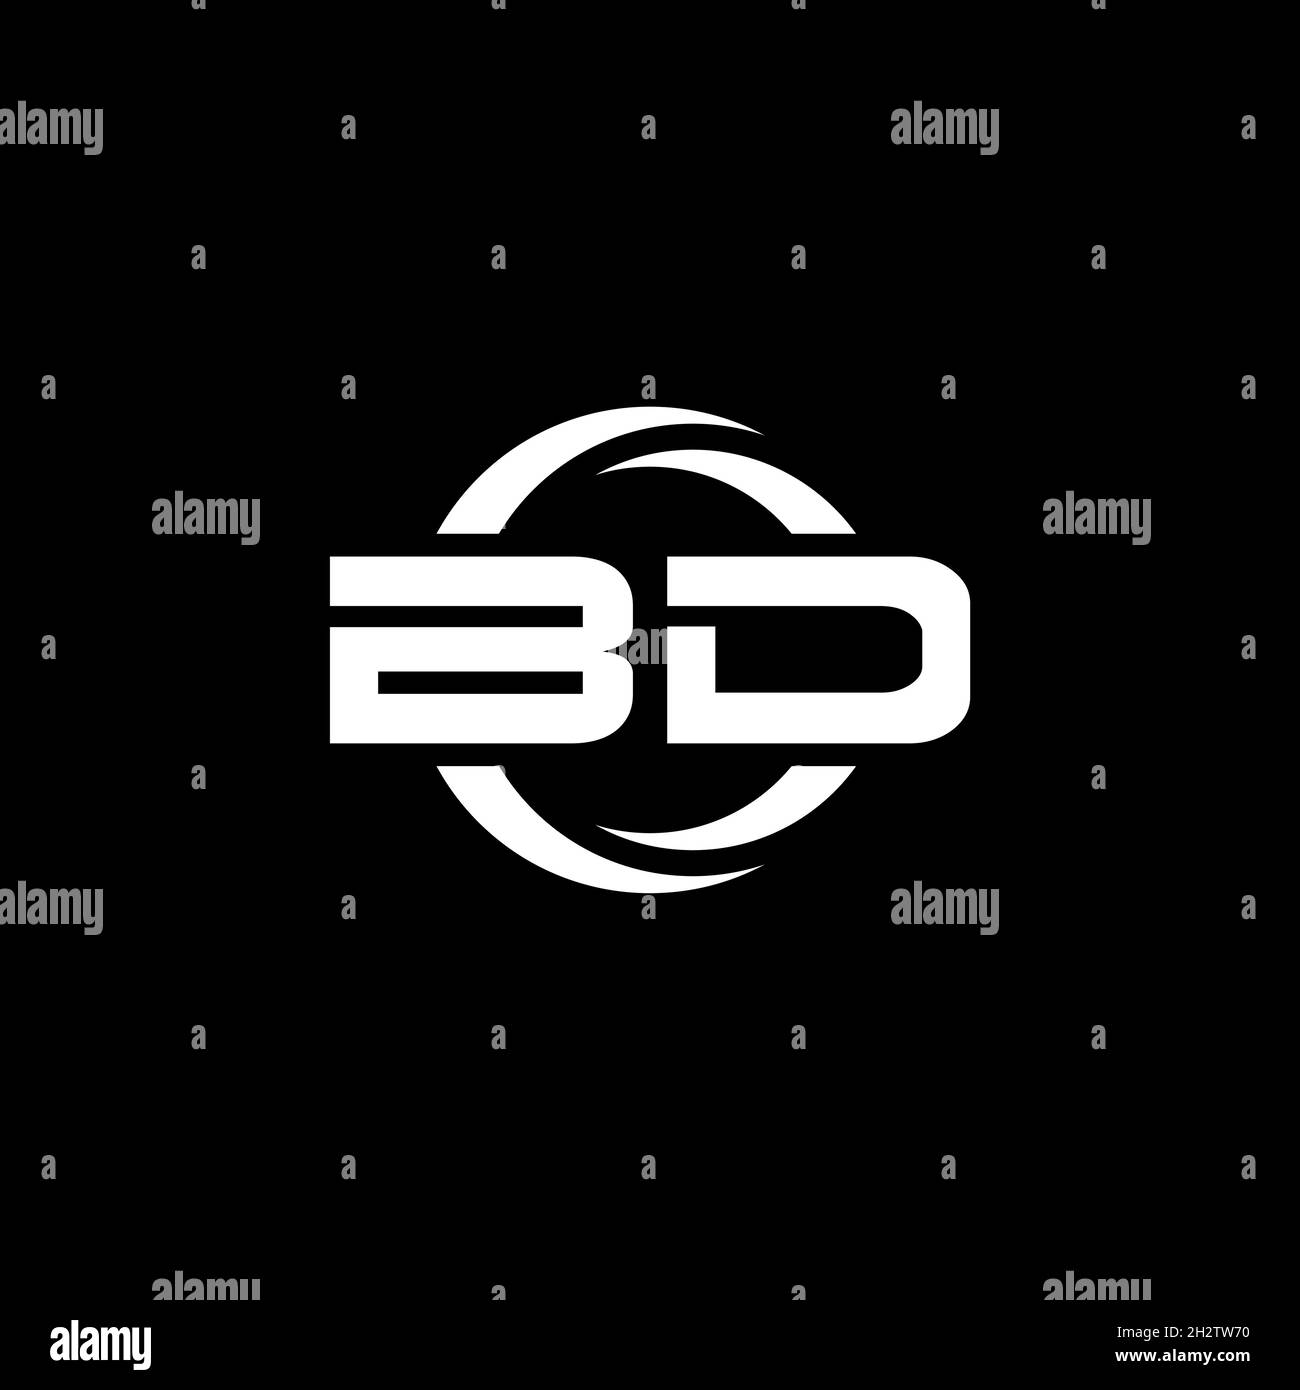 BD Monogram logo letter with simple shape and circle rounded design template isolated on black background Stock Vector